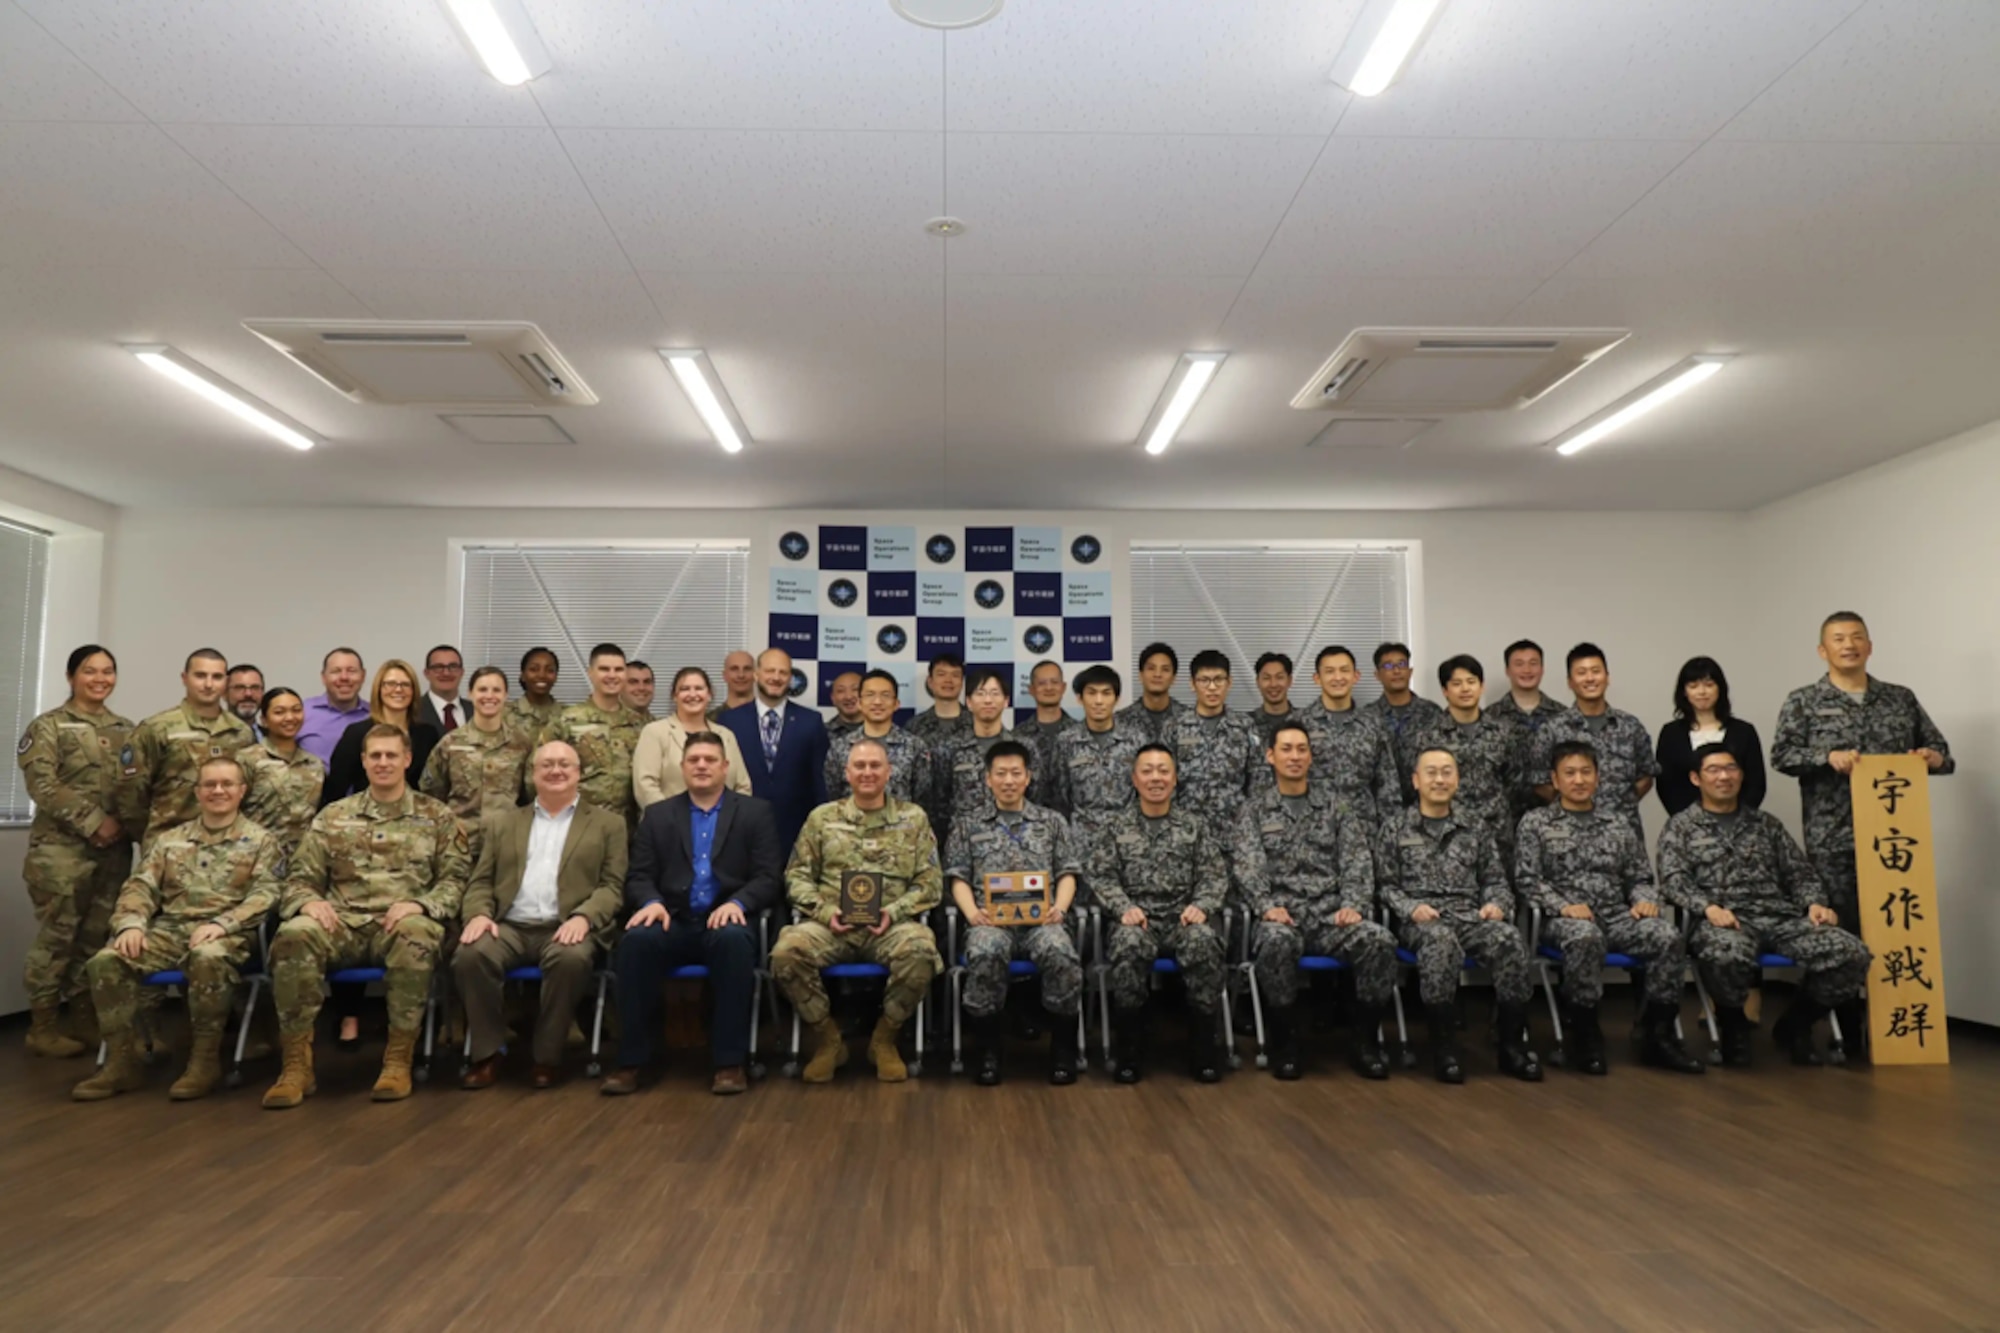 U.S. military representatives from U.S. Space Command, Space Systems Command, Delta 2 and the 18th Space Defense Squadron post for a photo with member from the Japan Air Self-Defense Force’s Space Operations Group at Fuchu Air Base, Japan, April 12, 2023. During the visit, participants discussed how they can implement best practices and lessons learned to further Space Domain Awareness data sharing and operational interoperability. (Courtesy photo)